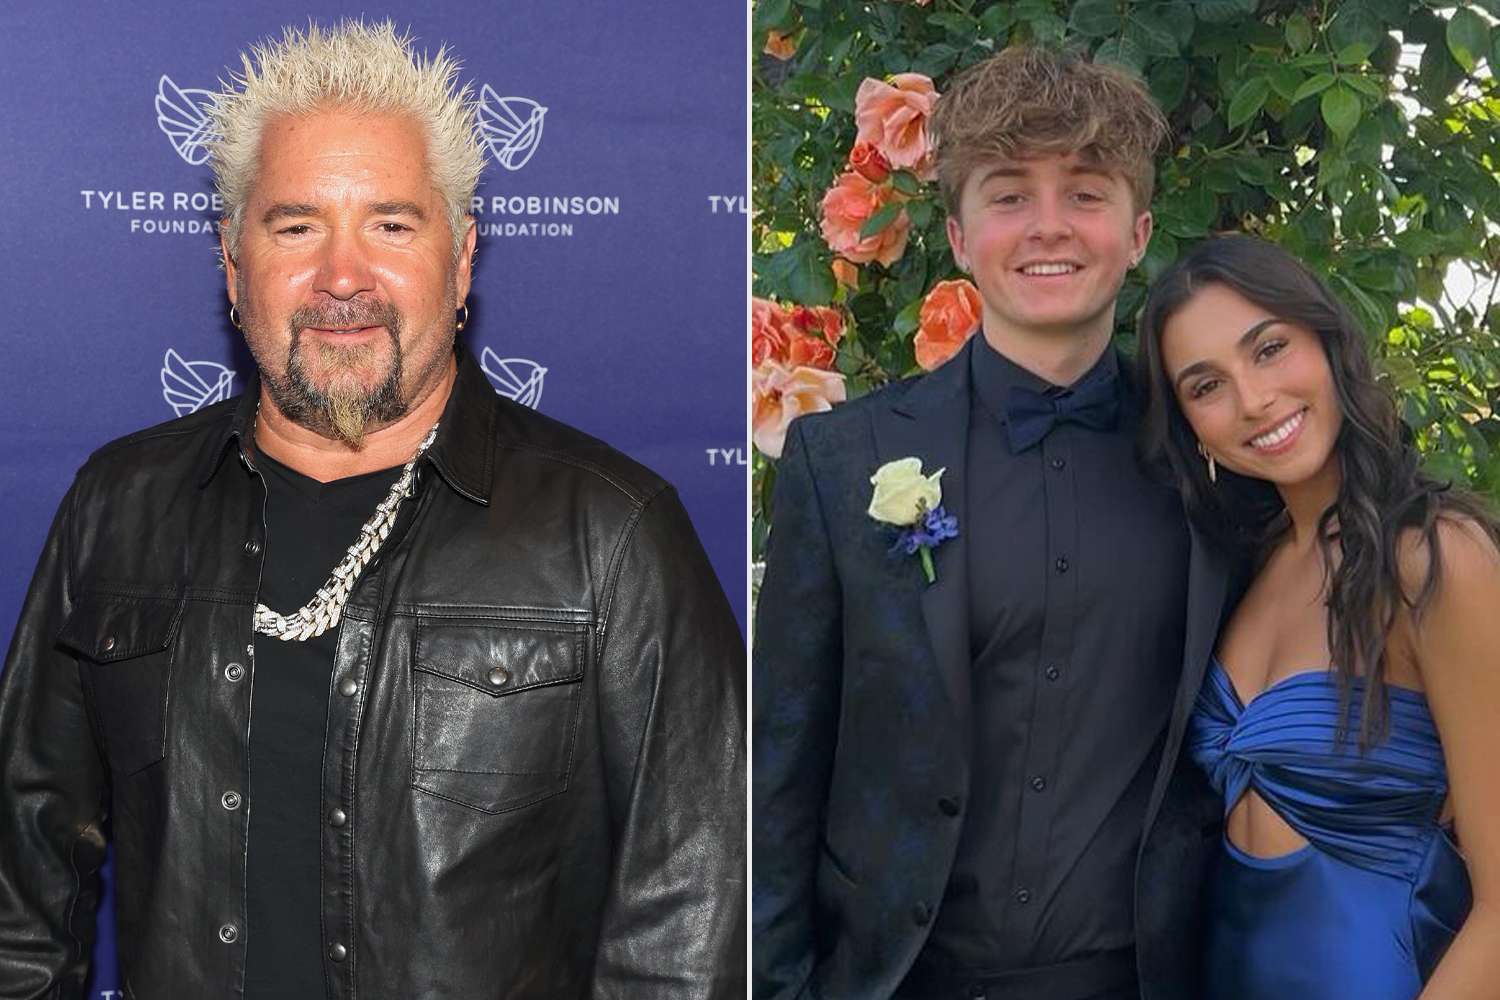 Guy Fieri’s Youngest Son Ryder Shares Photos from Prom with His Girlfriend: 'Last One'